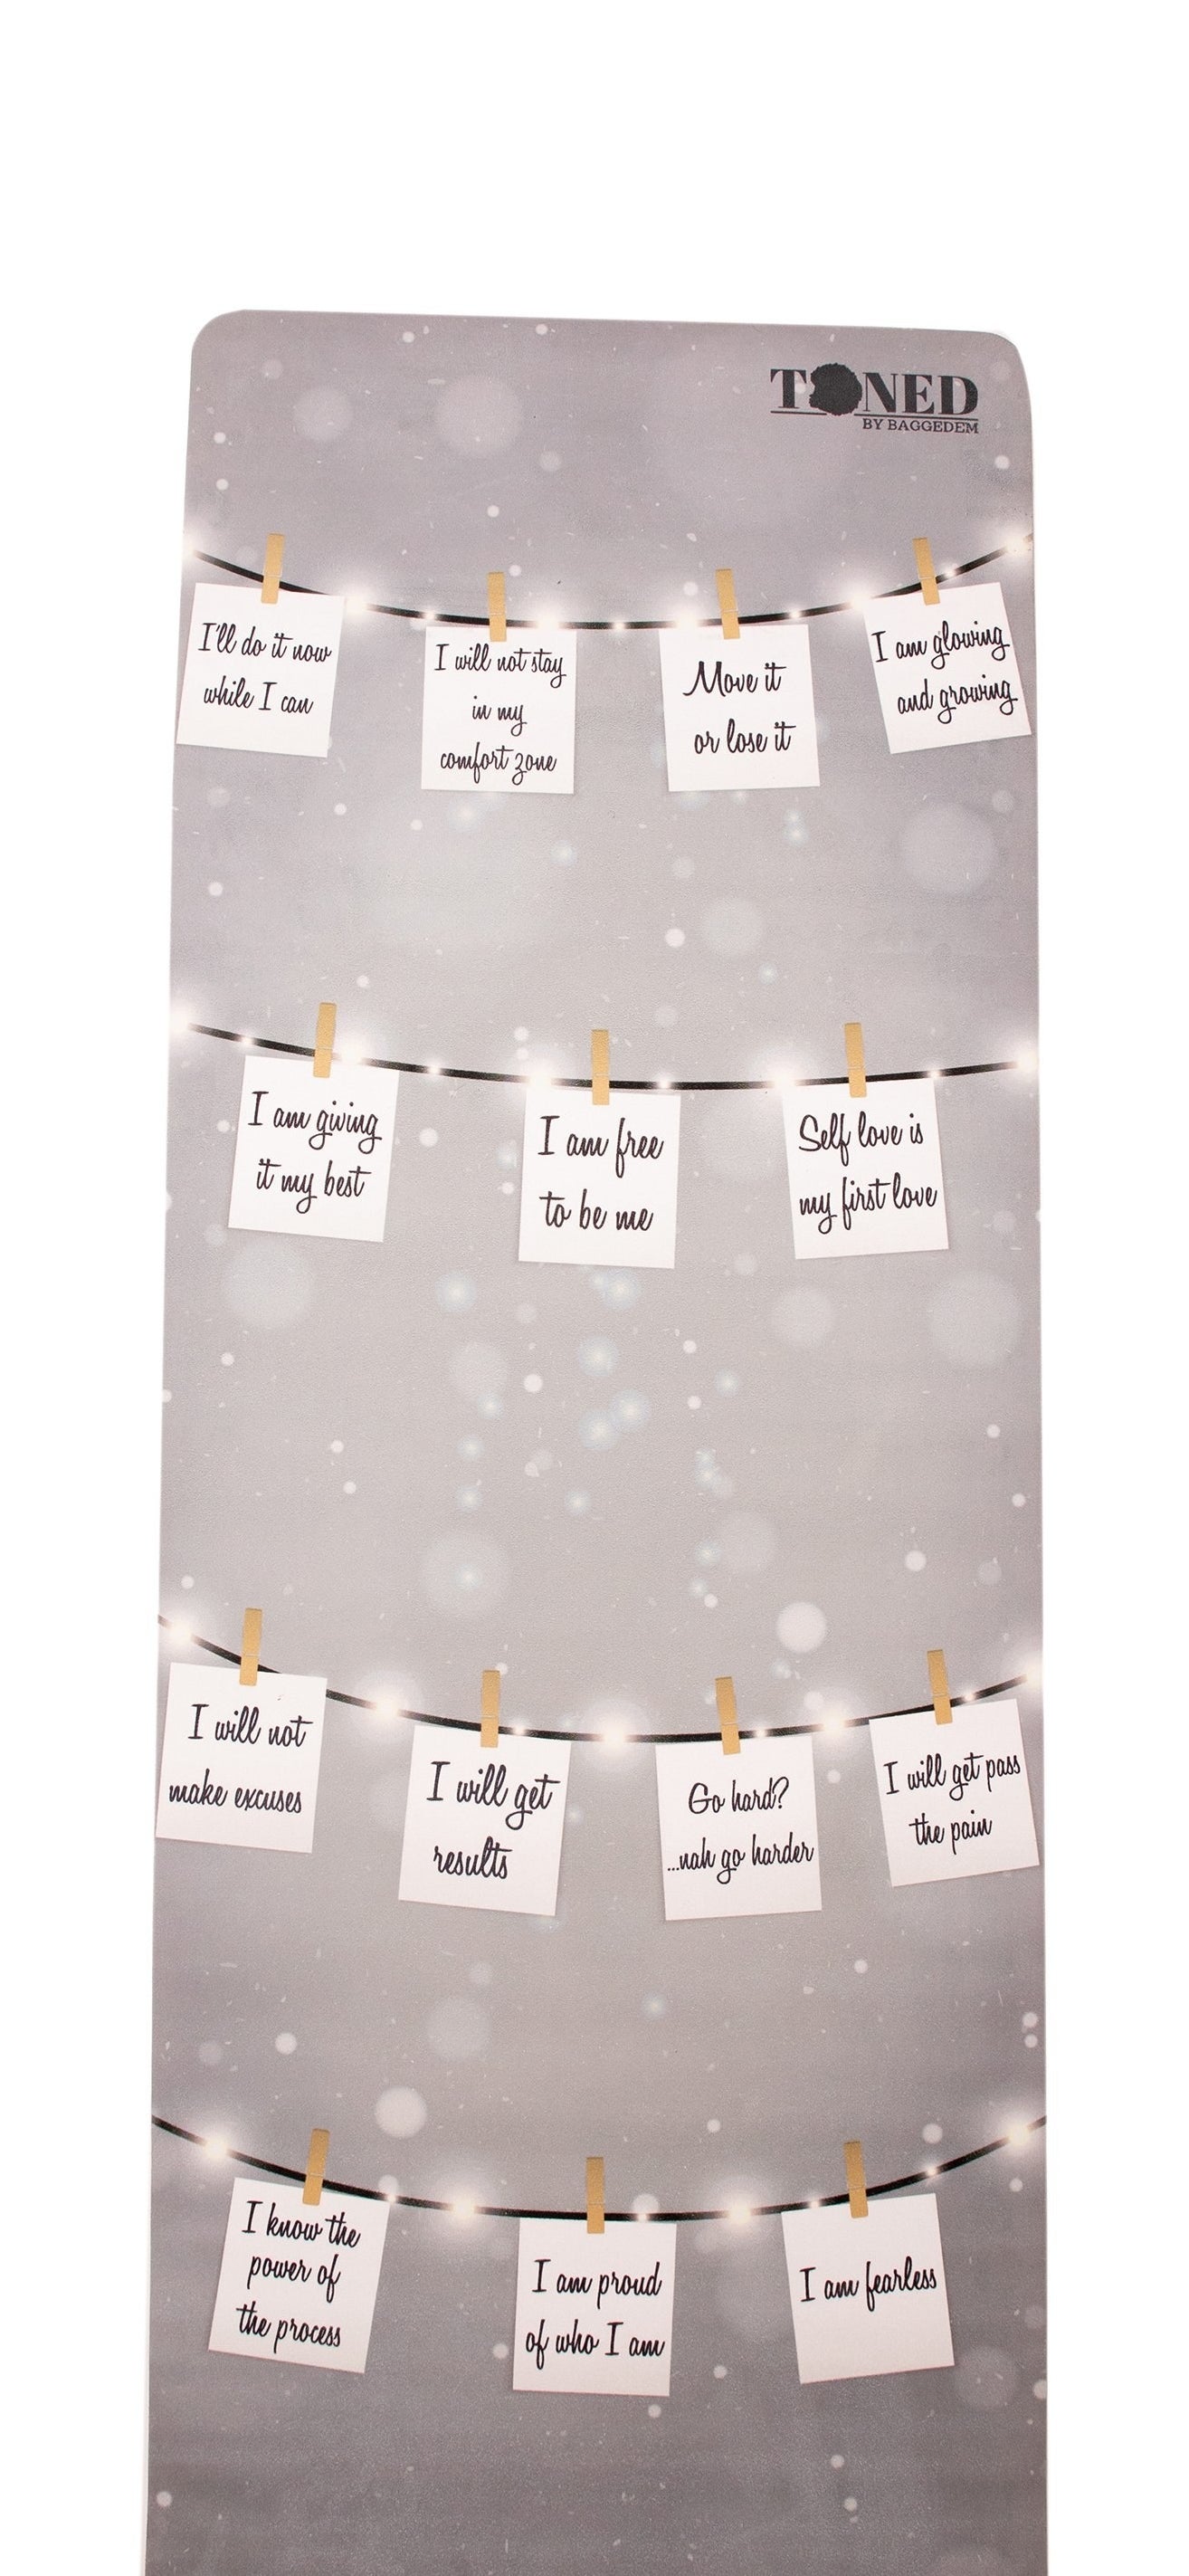 the gray affirmations mat with positive messages illustrated on stick notes on the mat